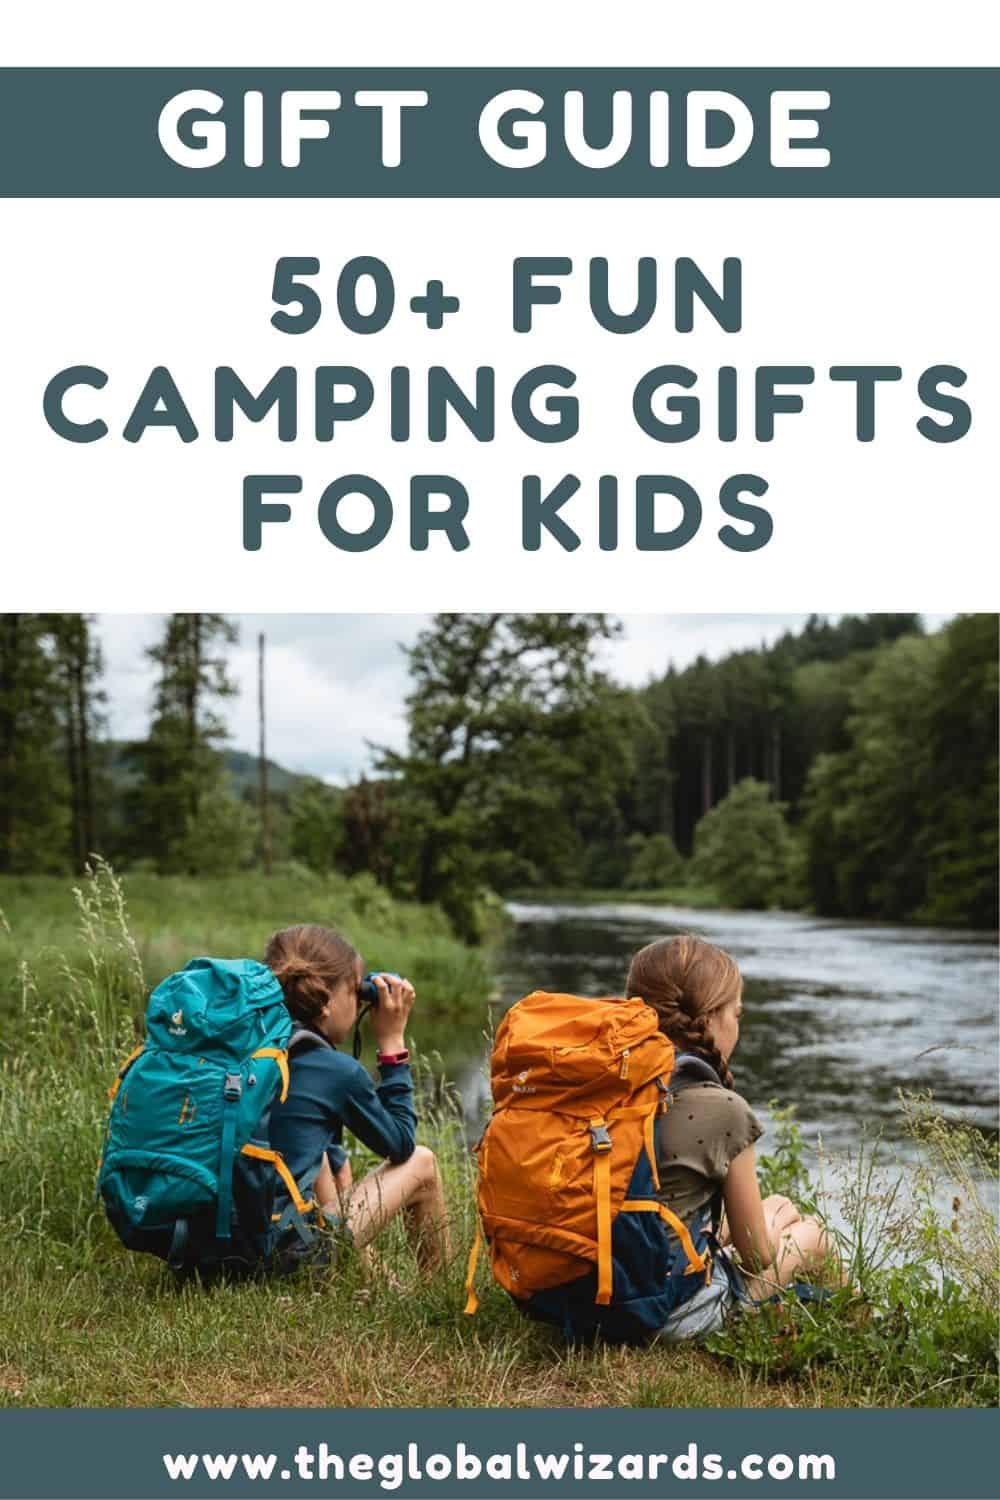 Camping gifts for kids: 50+ fun camping gift ideas for kids · The ...